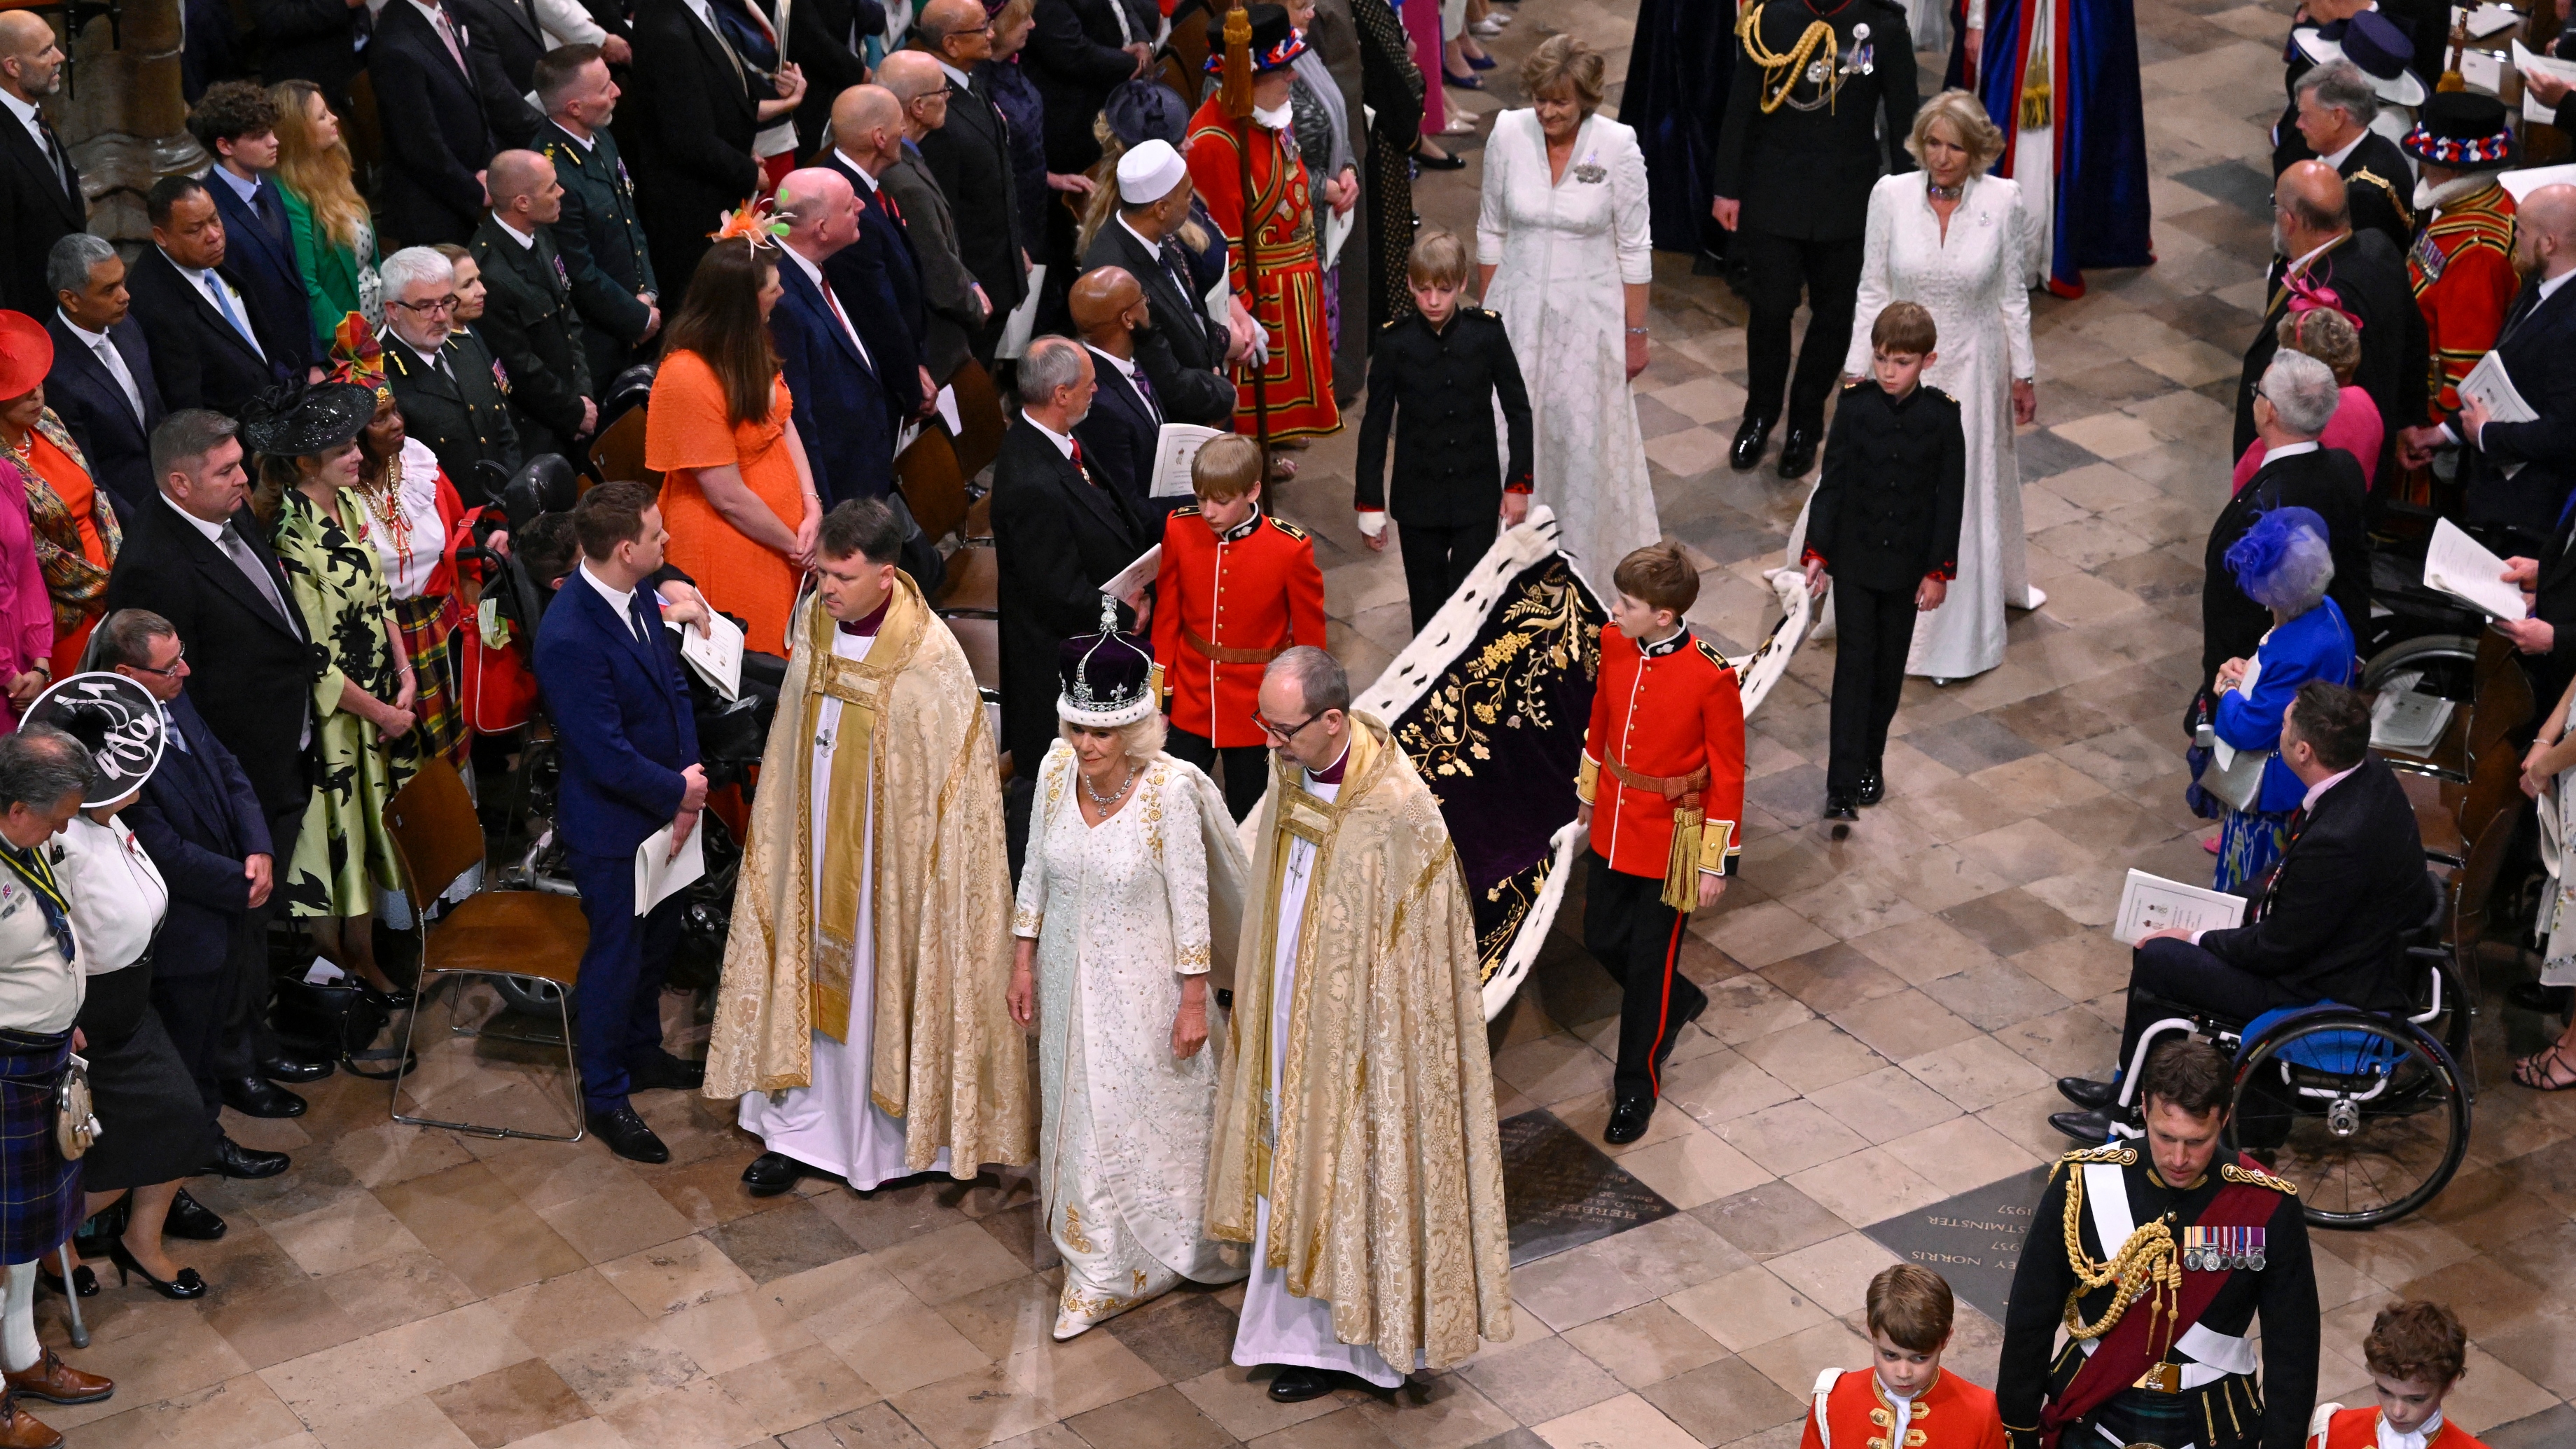 Queen Camilla departs the Coronation service with Lady Lansdowne and Annabel Elliot behind her